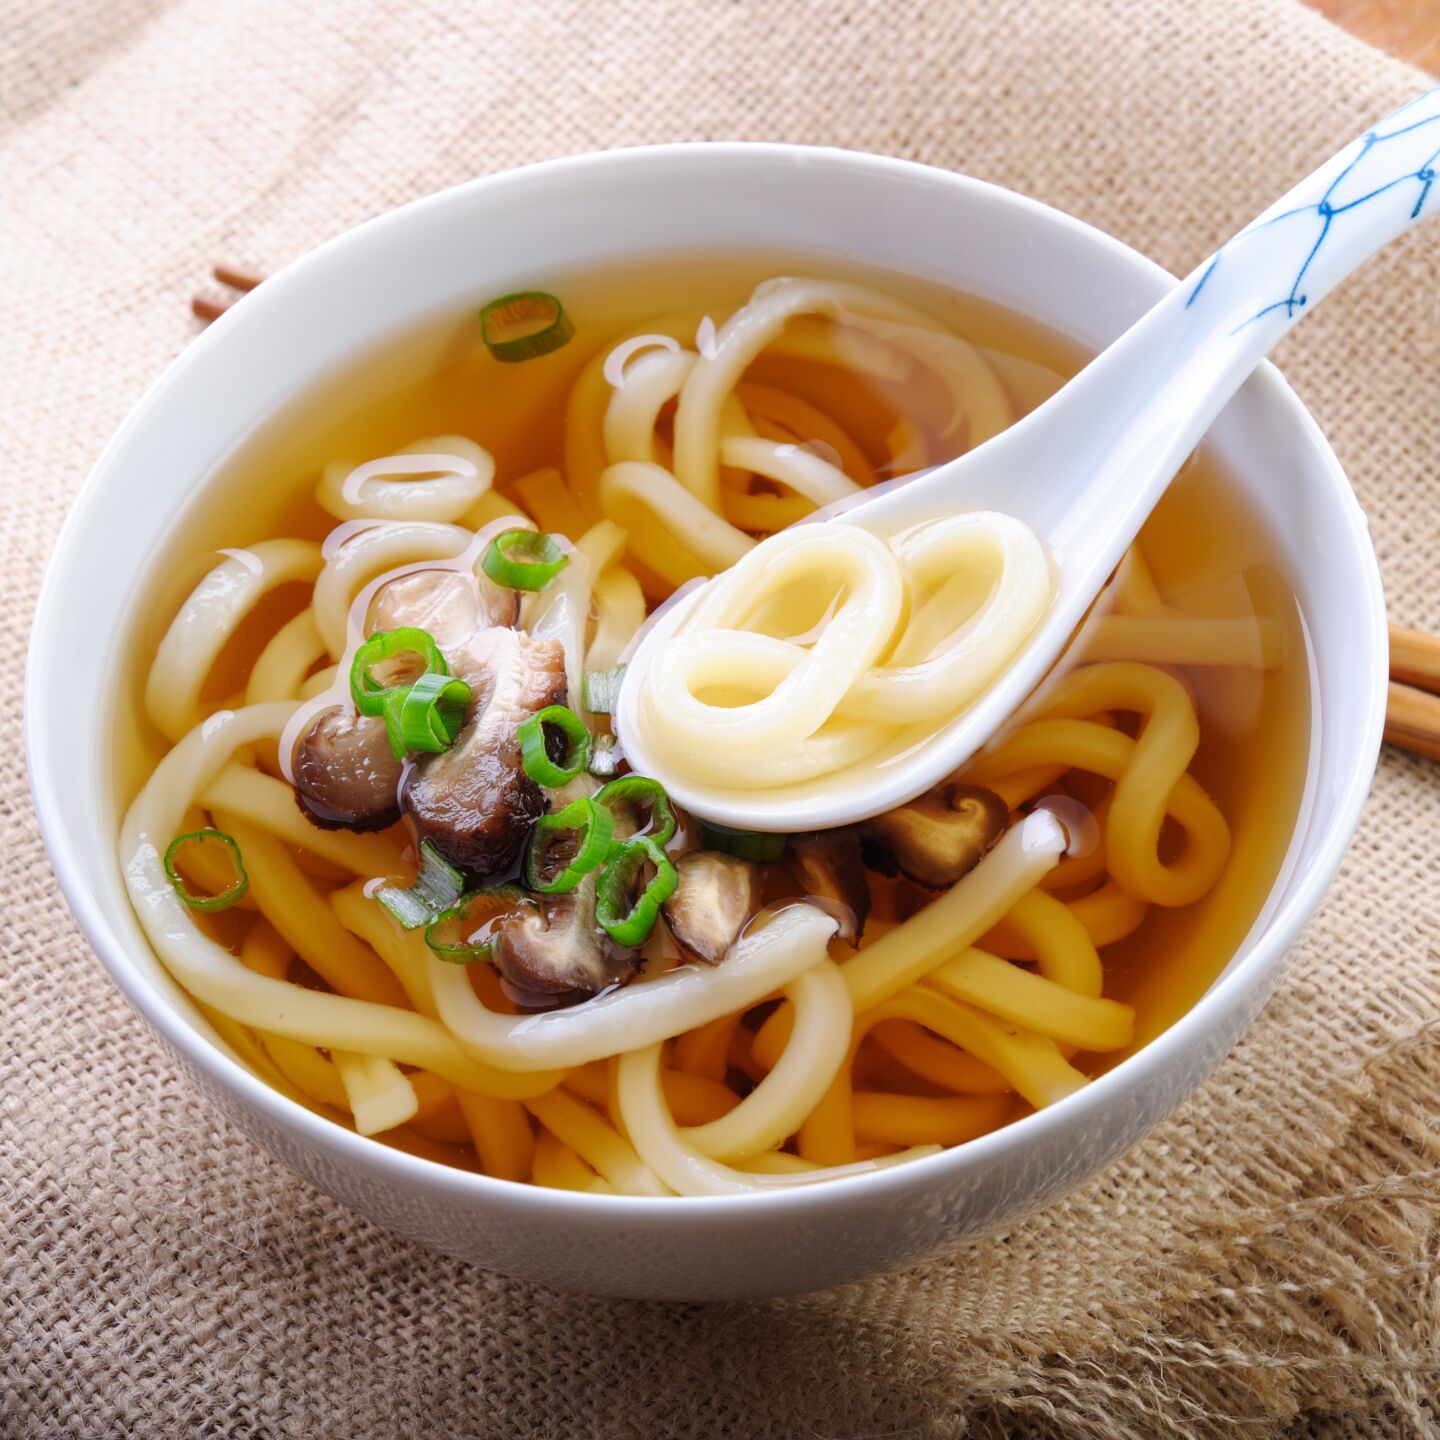 32 Different Types of Pasta - Udon pasta